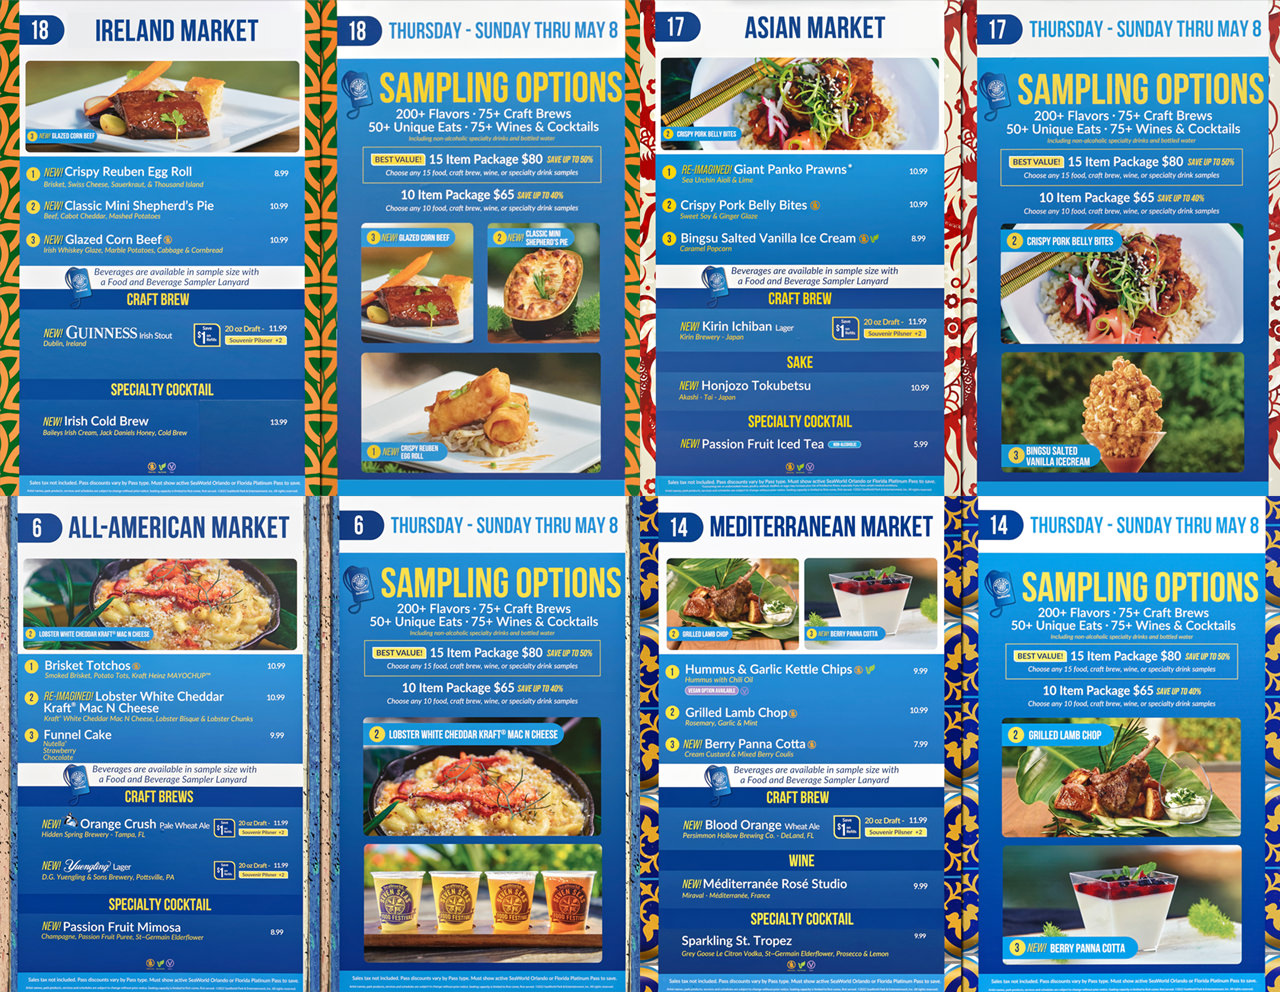 Menu Boards and Prices for the 2022 Seven Seas Food Festival at SeaWorld Orlando